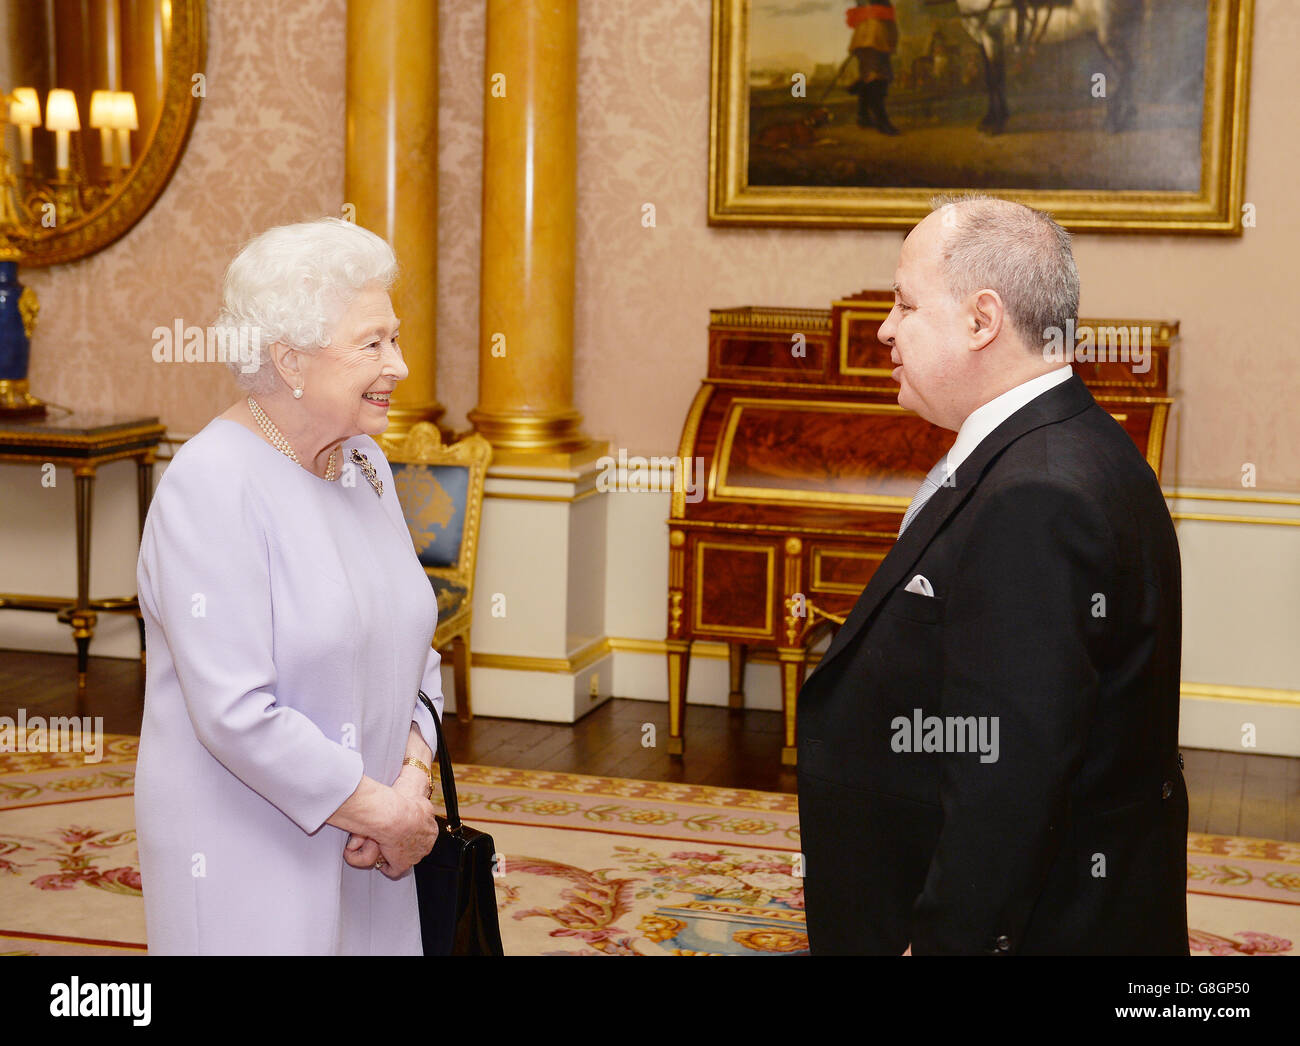 His Excellency Mr Eduardo dos Santos the Ambassador of Brazil, as he presents his credentials to Queen Elizabeth II at Buckingham Palace in London. Stock Photo